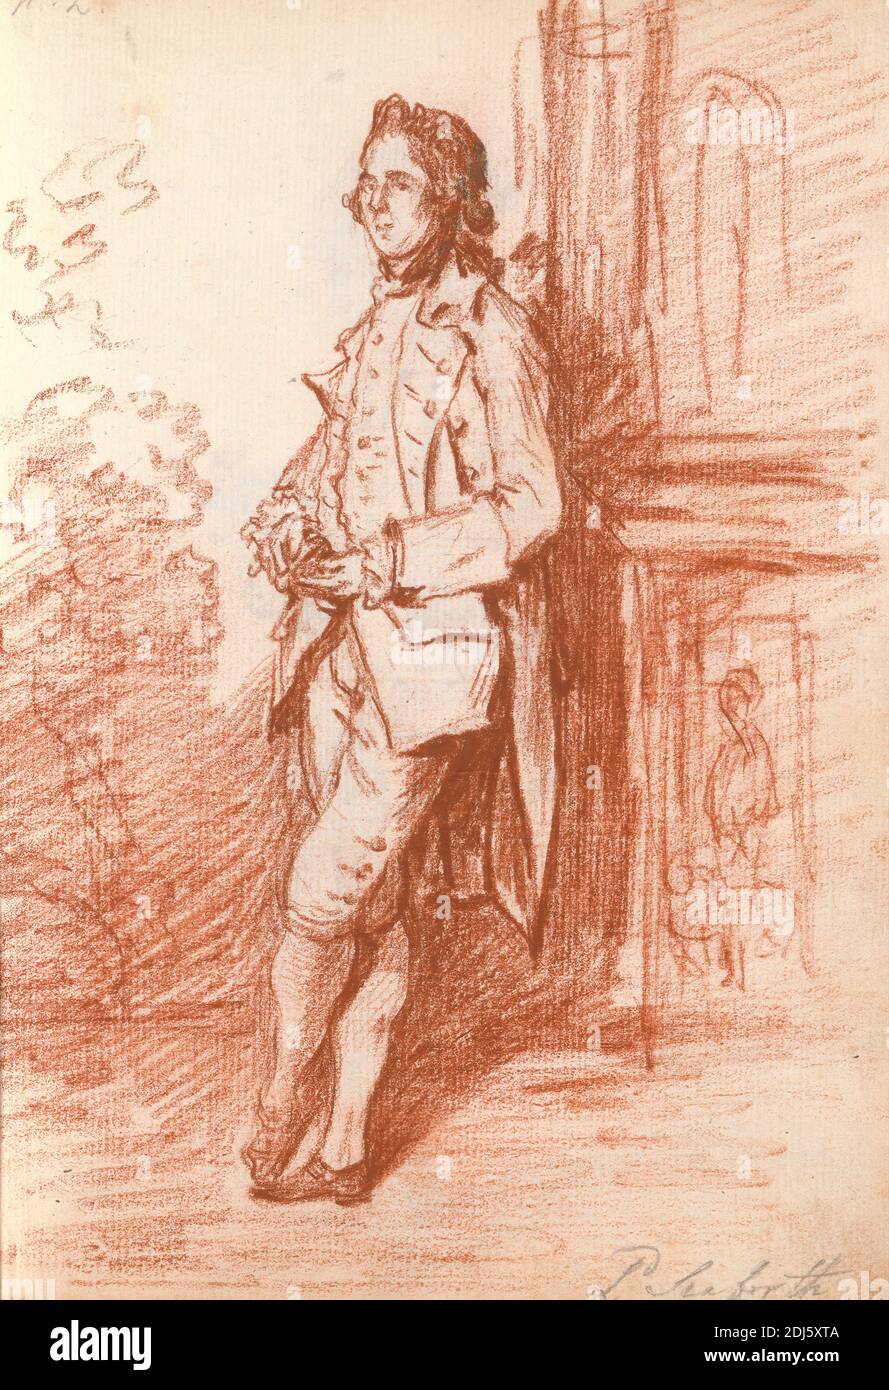 Lord Seaforth Standing, Leaning against a Pillar, Thomas Patch, 1725–1782, British, 1760s, Red chalk on medium, slightly textured, cream laid paper bound in carta fiorentina, Sheet: 8 3/4 x 6 1/2 inches (22.2 x 16.5 cm) and Spine: 8 7/8 inches (22.5 cm), Grand Tour, portrait Stock Photo